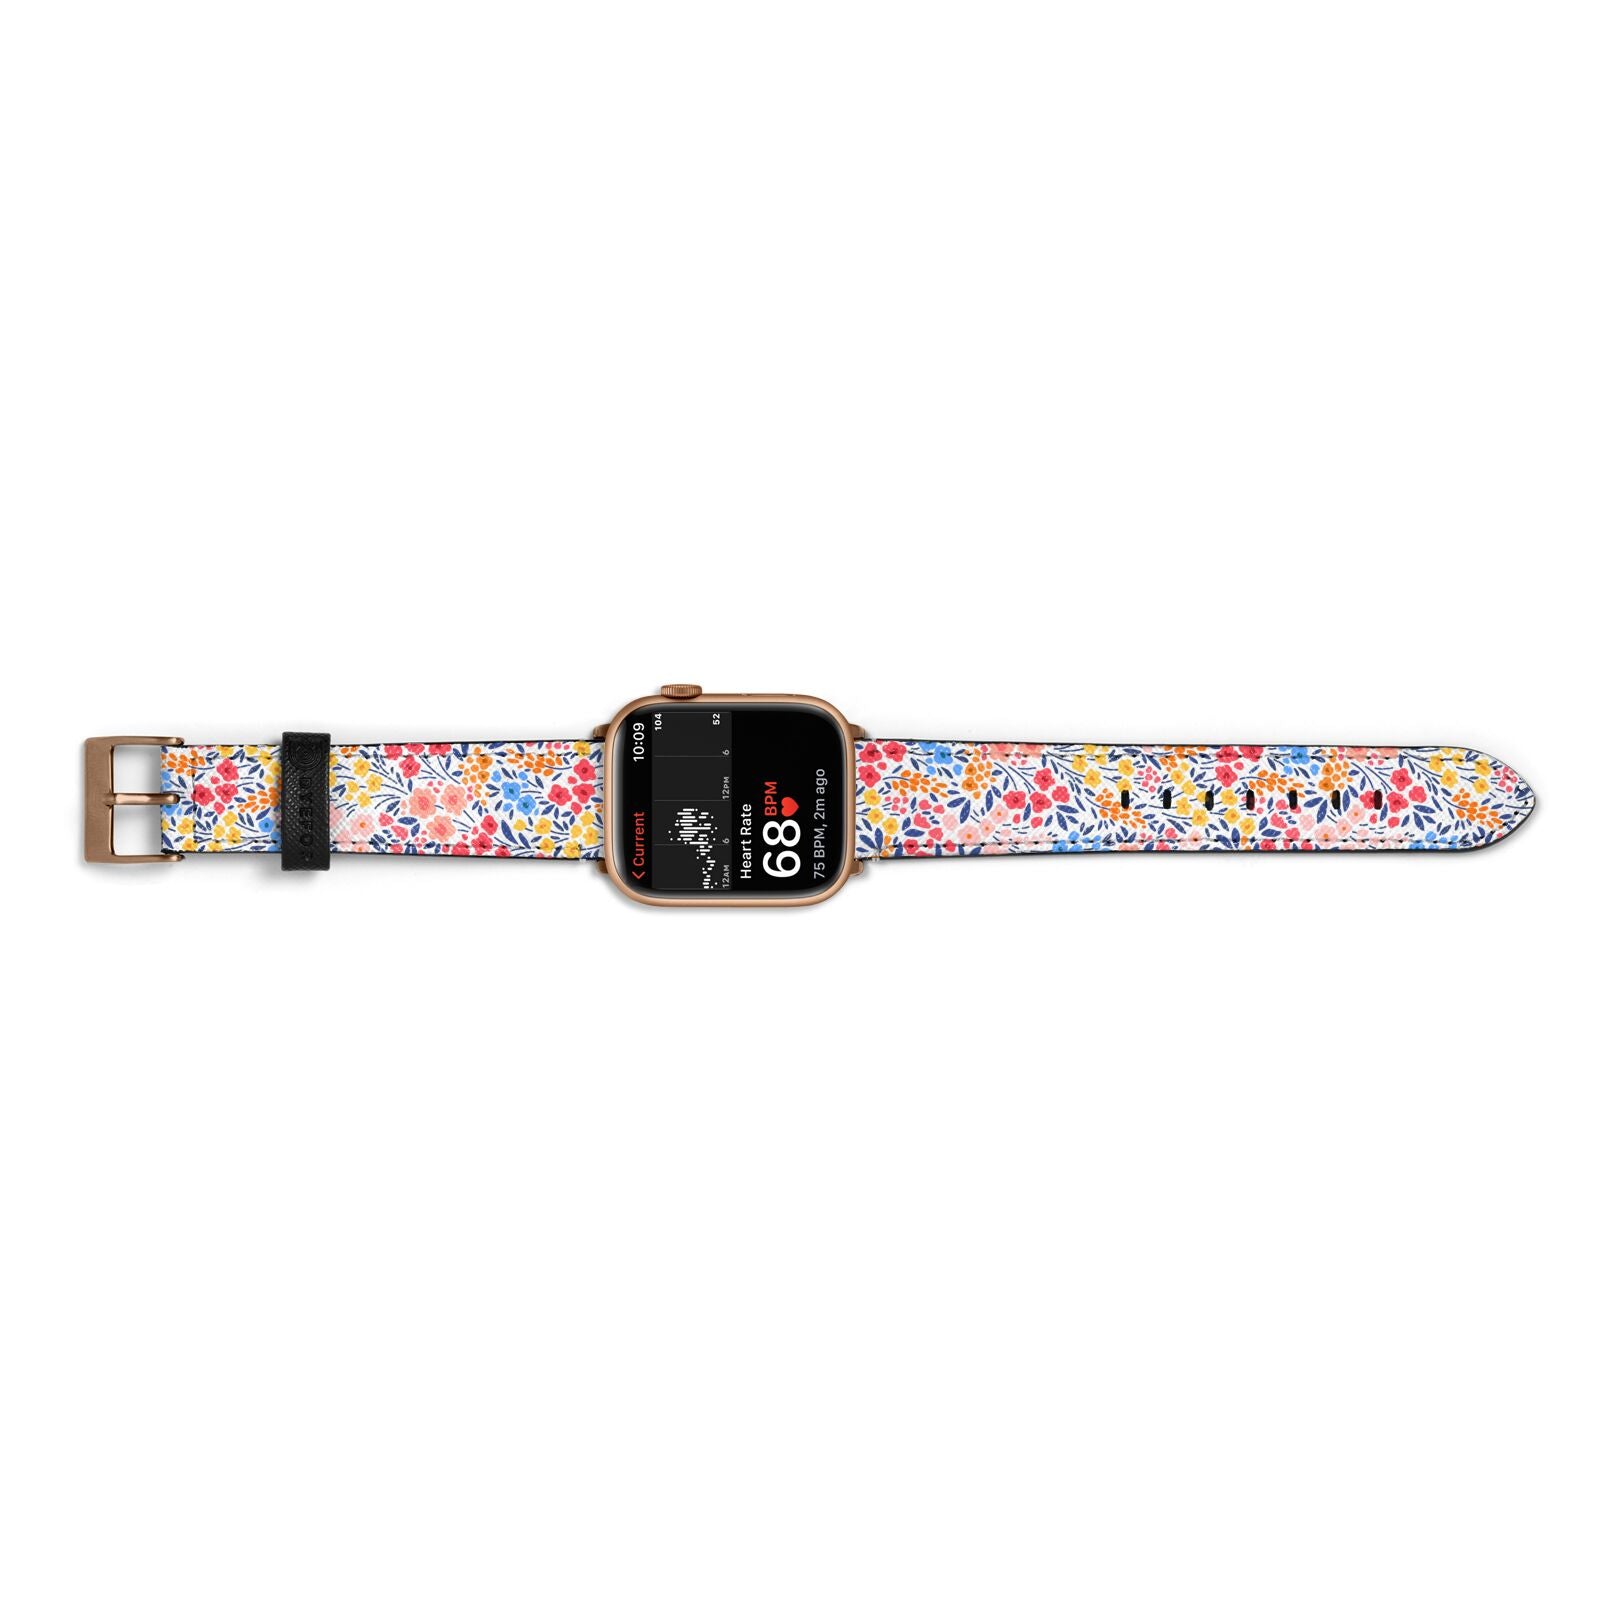 Small Flowers Apple Watch Strap Size 38mm Landscape Image Gold Hardware